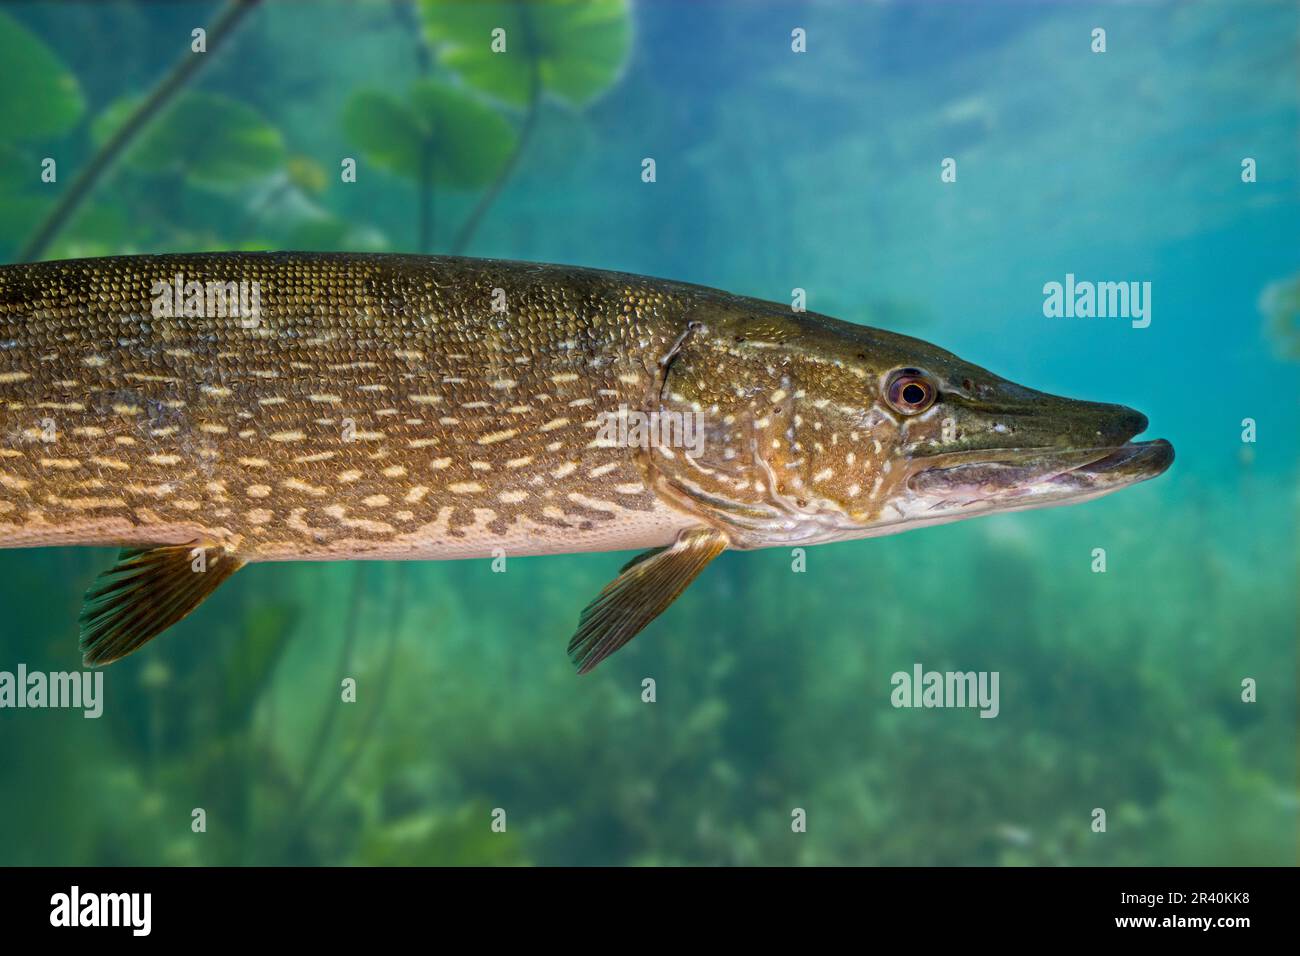 Northern pike (Esox lucius) carnivorous fish swimming and hunting underwater in freshwater lake Stock Photo